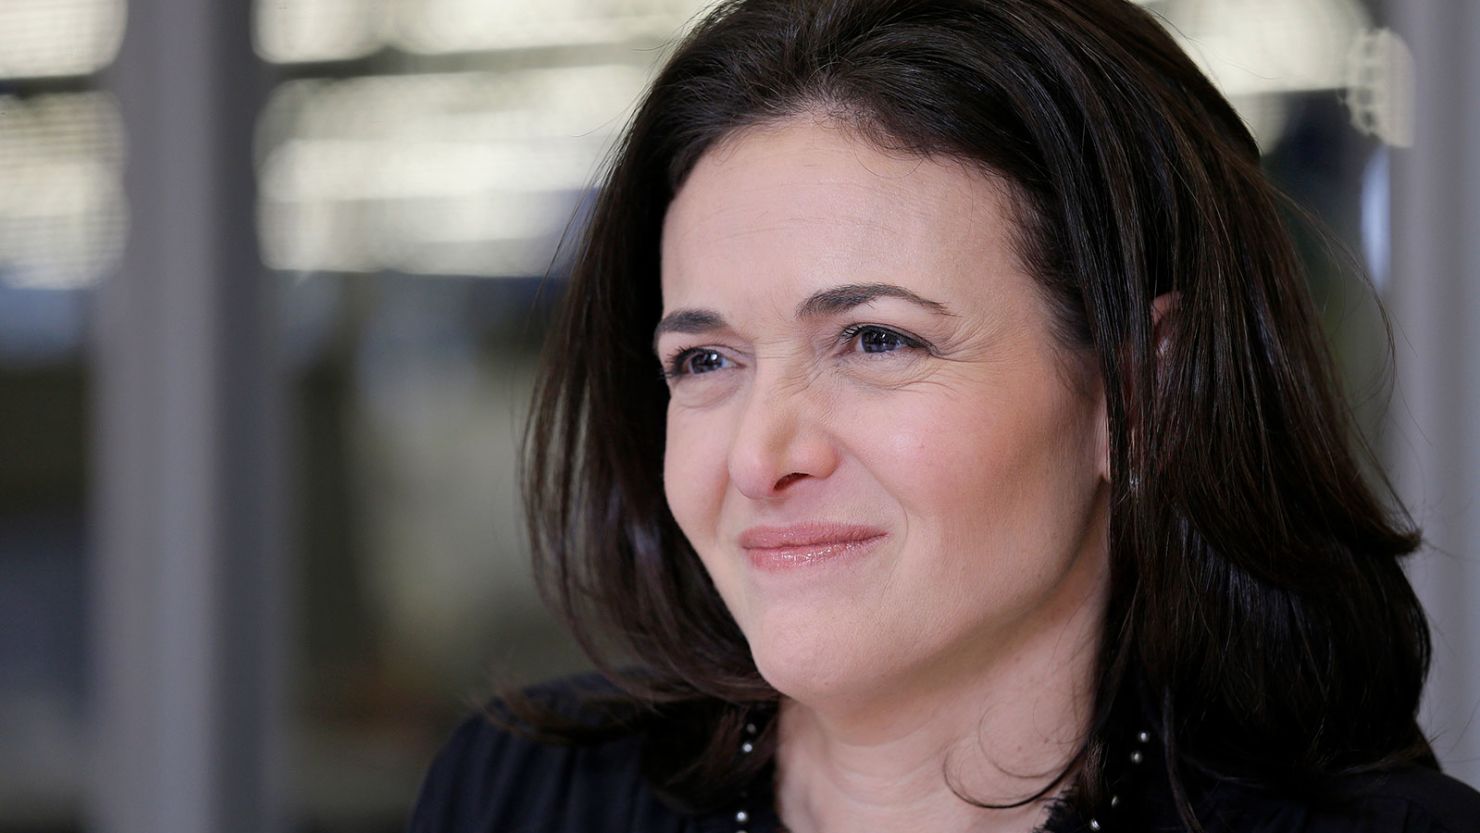 Sheryl Sandberg, who spent more than a decade serving as chief operating officer and a board member at Meta, plans to leave the company's board of directors in May.